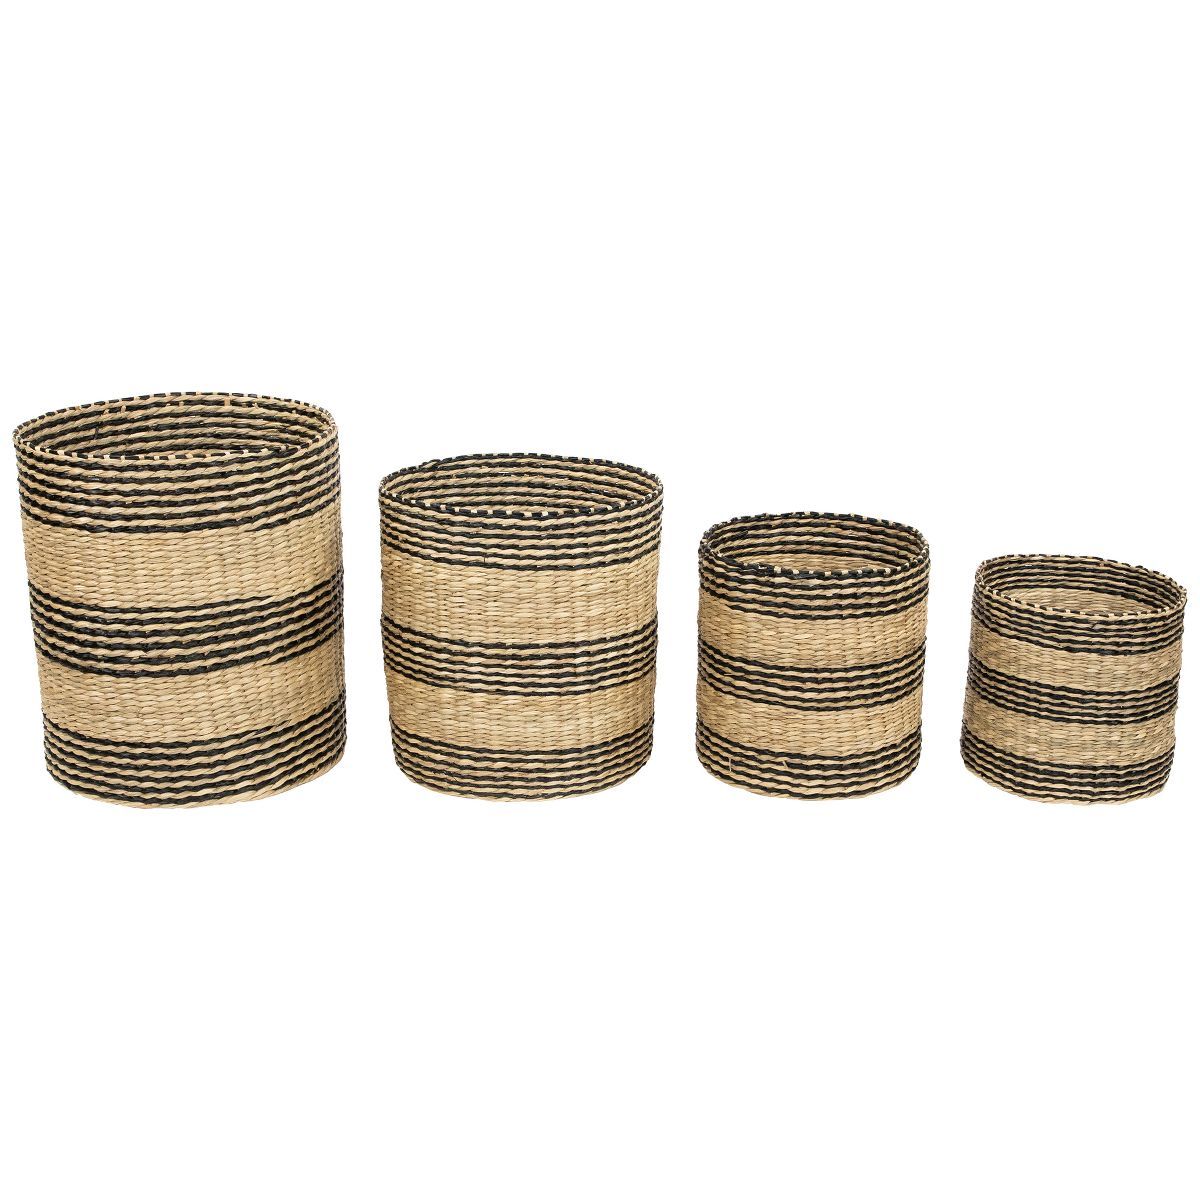 Northlight Set of 4 Beige and Black Striped Woven Round Seagrass Baskets 12" | Target